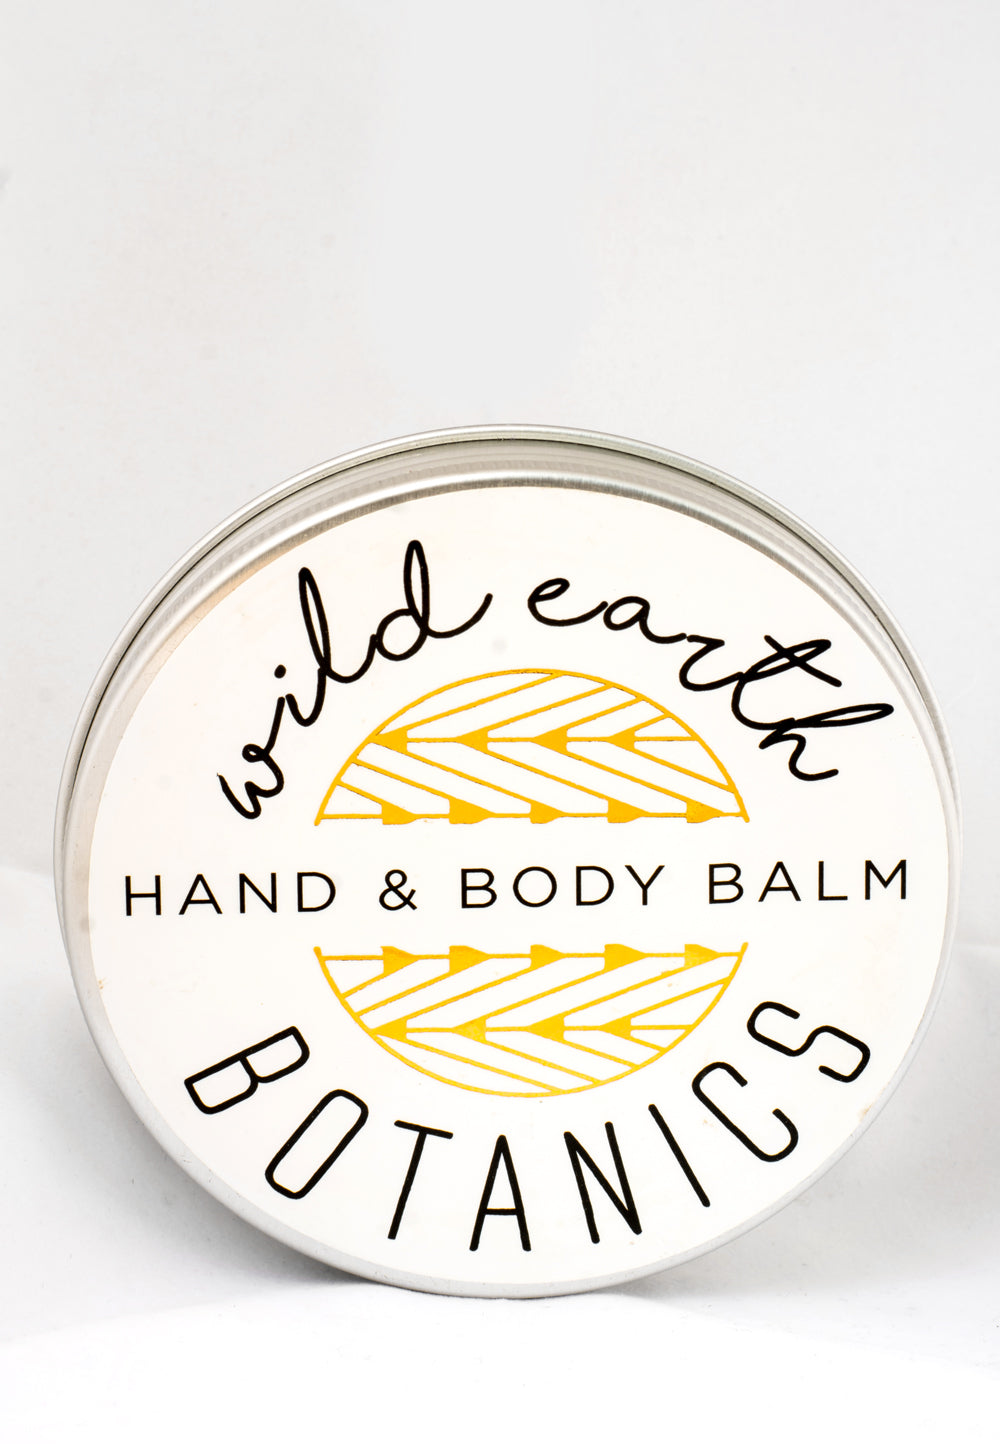 Hand and Body Balm